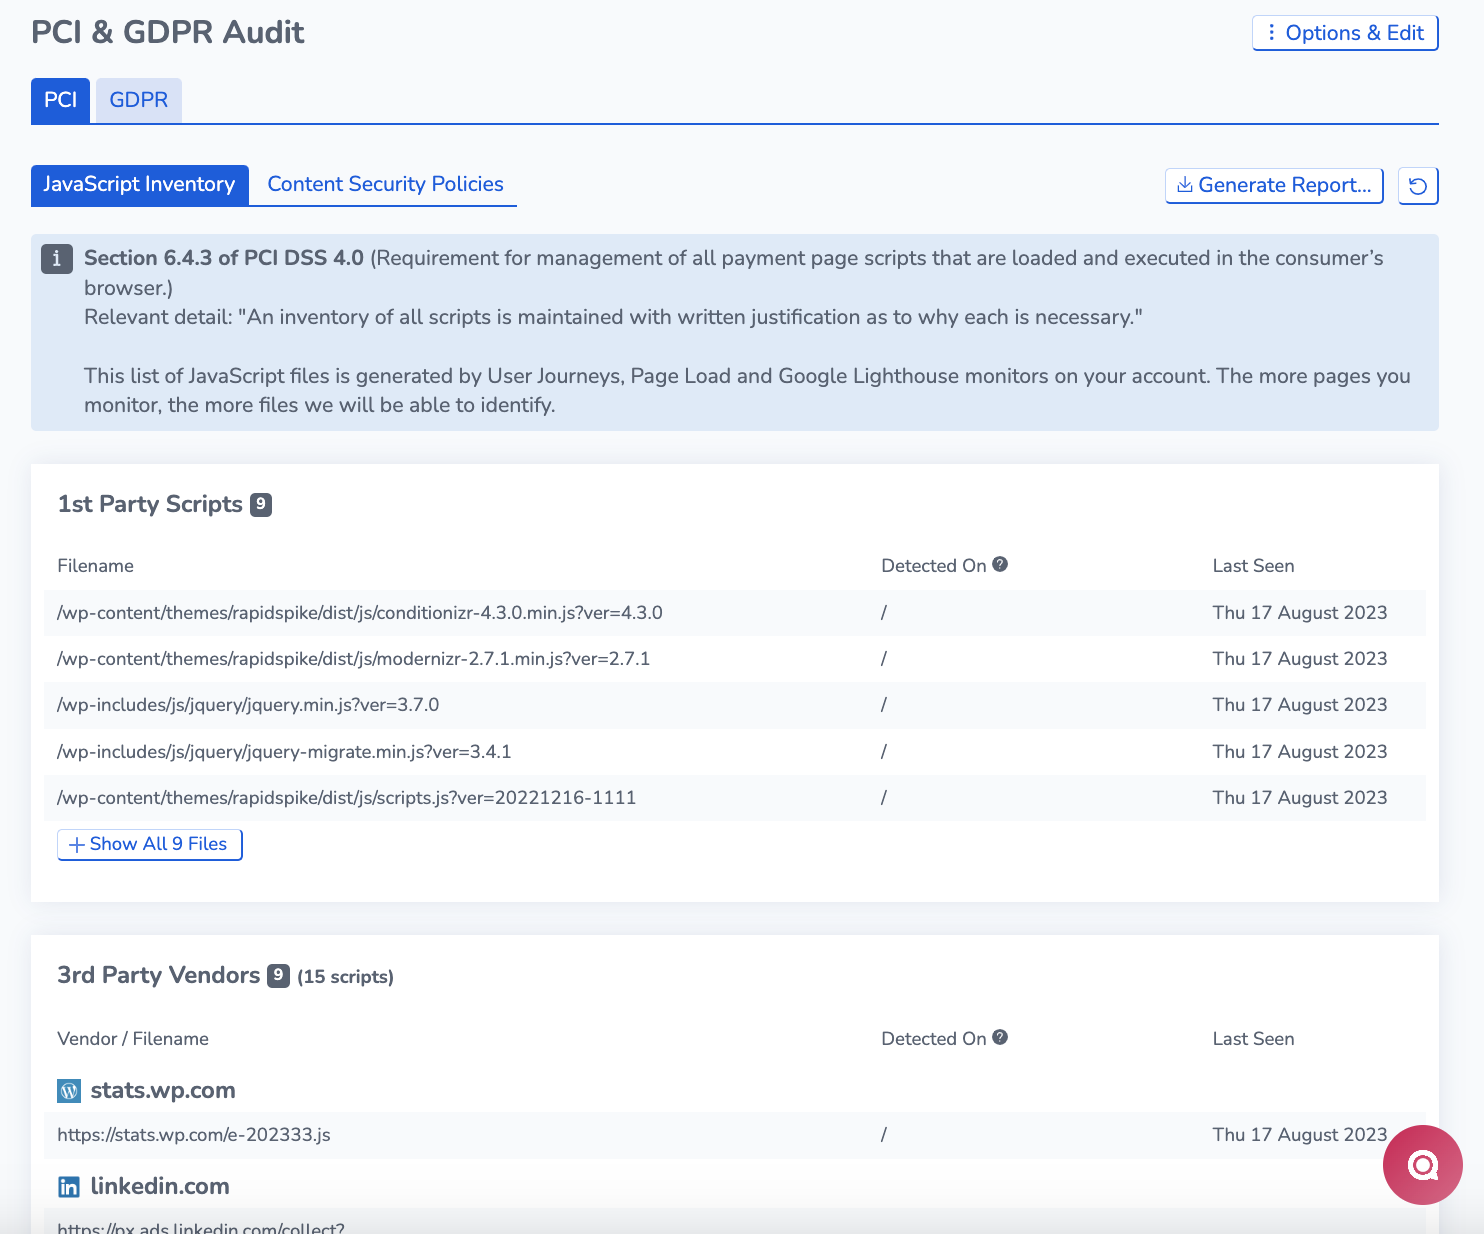 PCI and GDPR Audit page: JavaScript Inventory